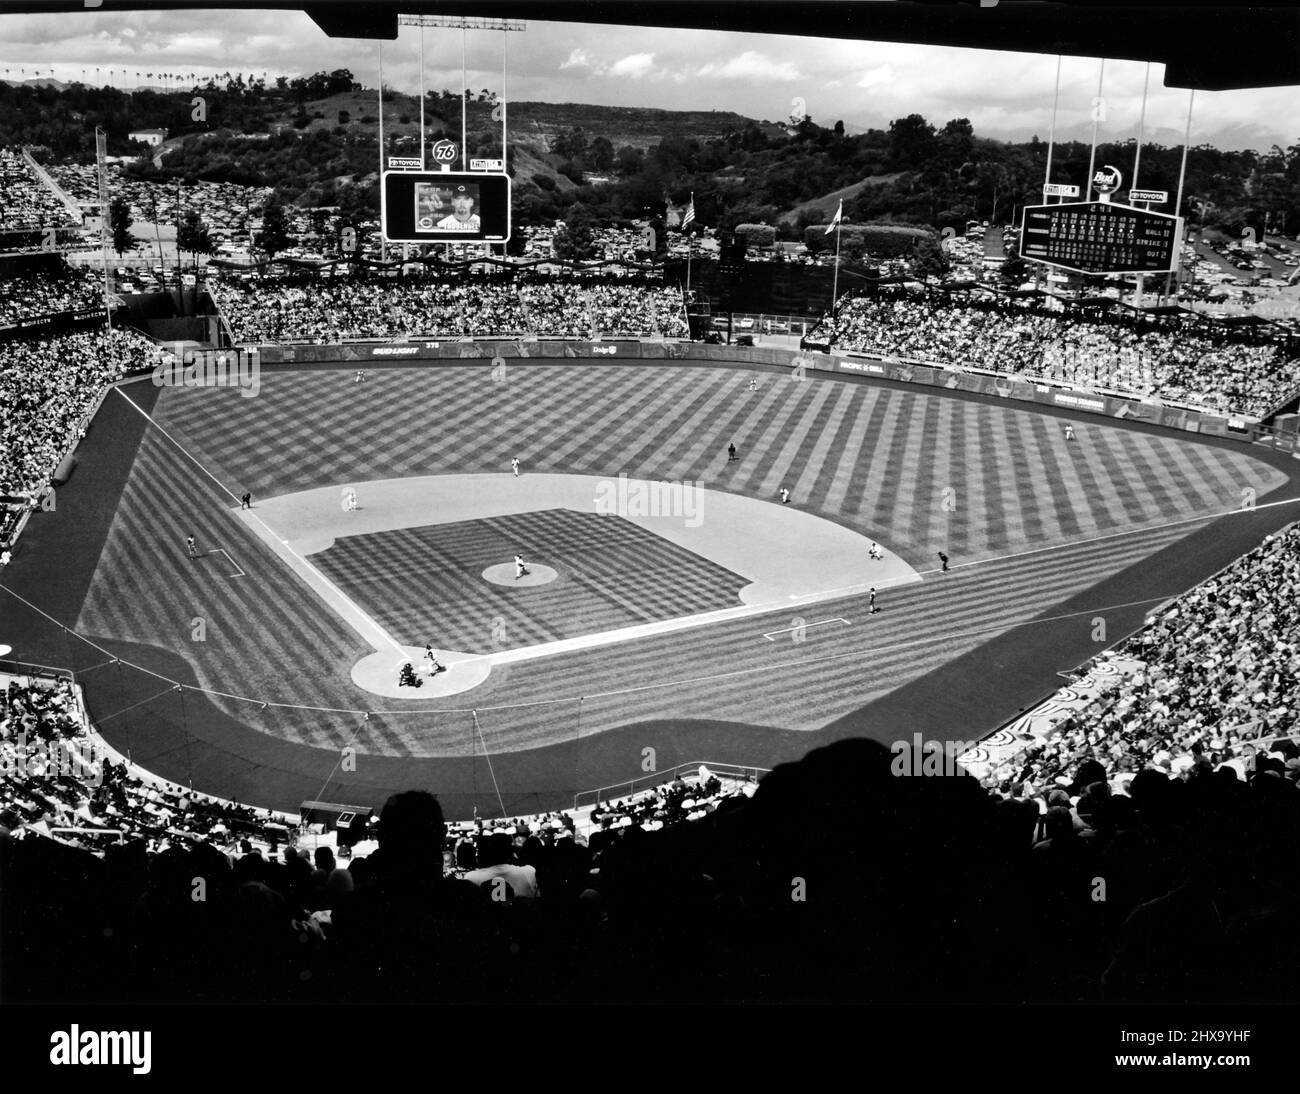 Sold out crowd at day baseball game at Dodger Stadium in Los Angeles, CA circa 1980s. Stock Photo